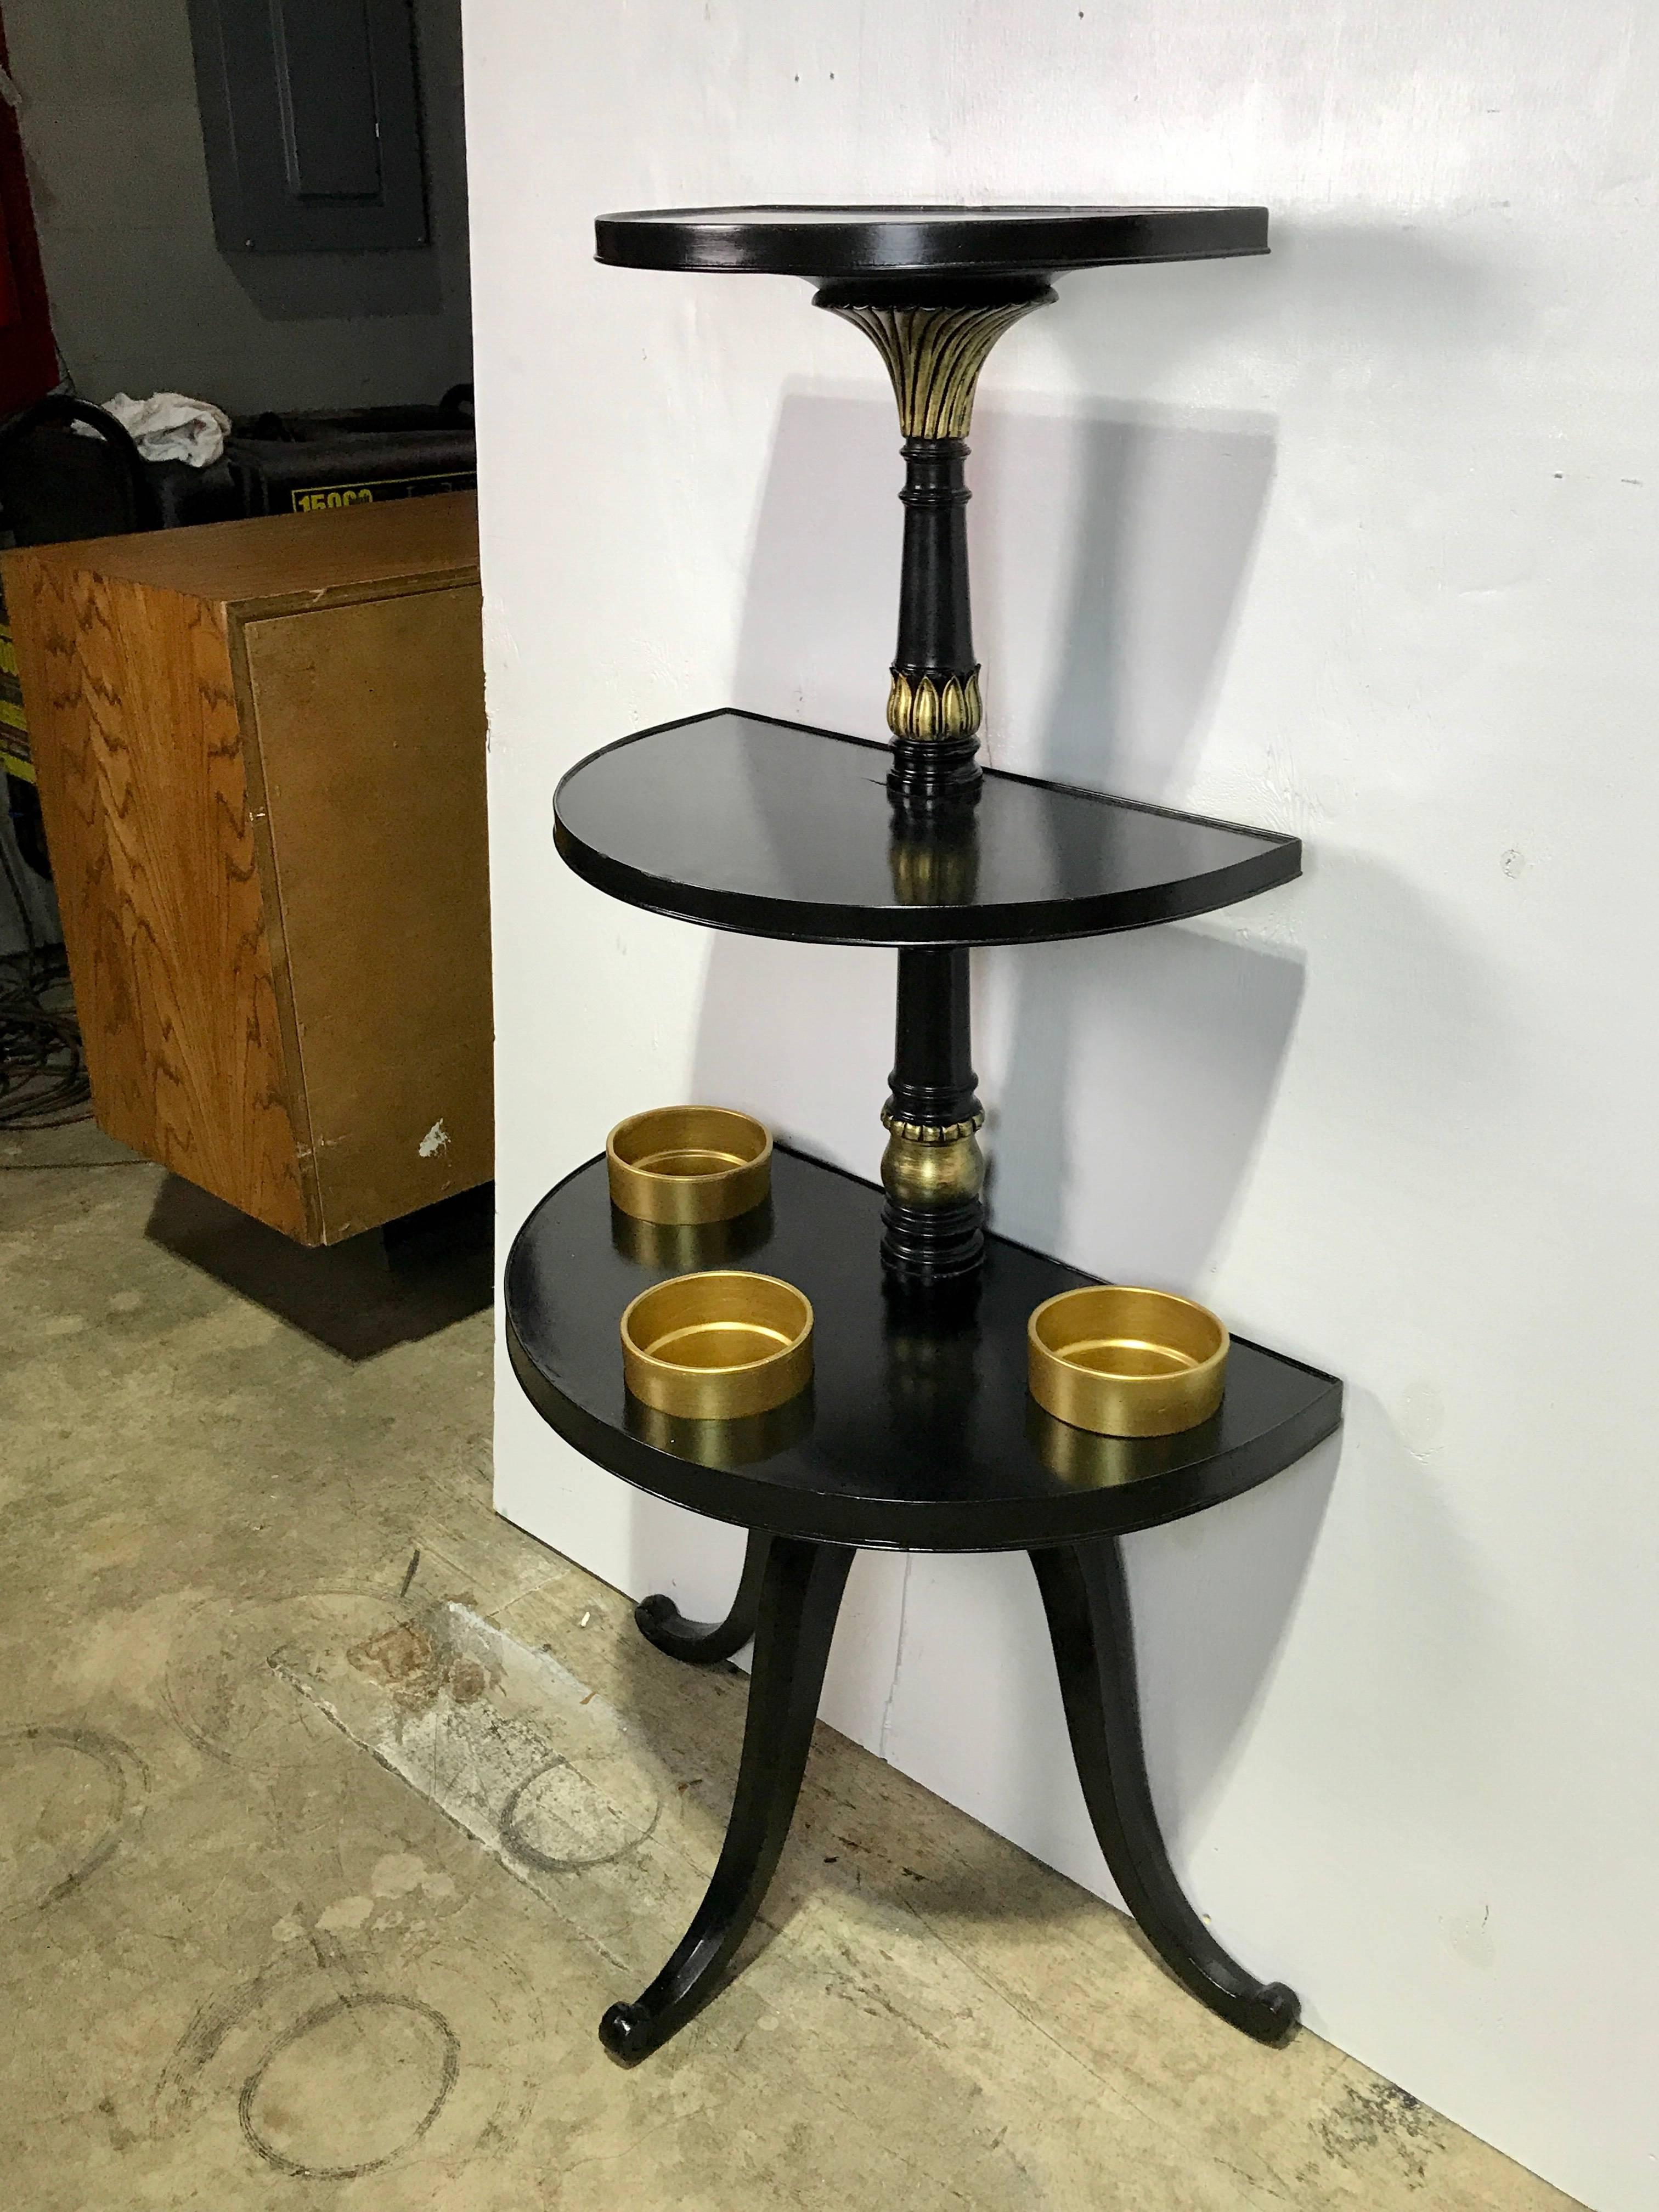 Maison Jansen style black lacquered and gilt plant stand, of demilune form fitted with three gilt 5-inch pots.
Top shelf measures 16